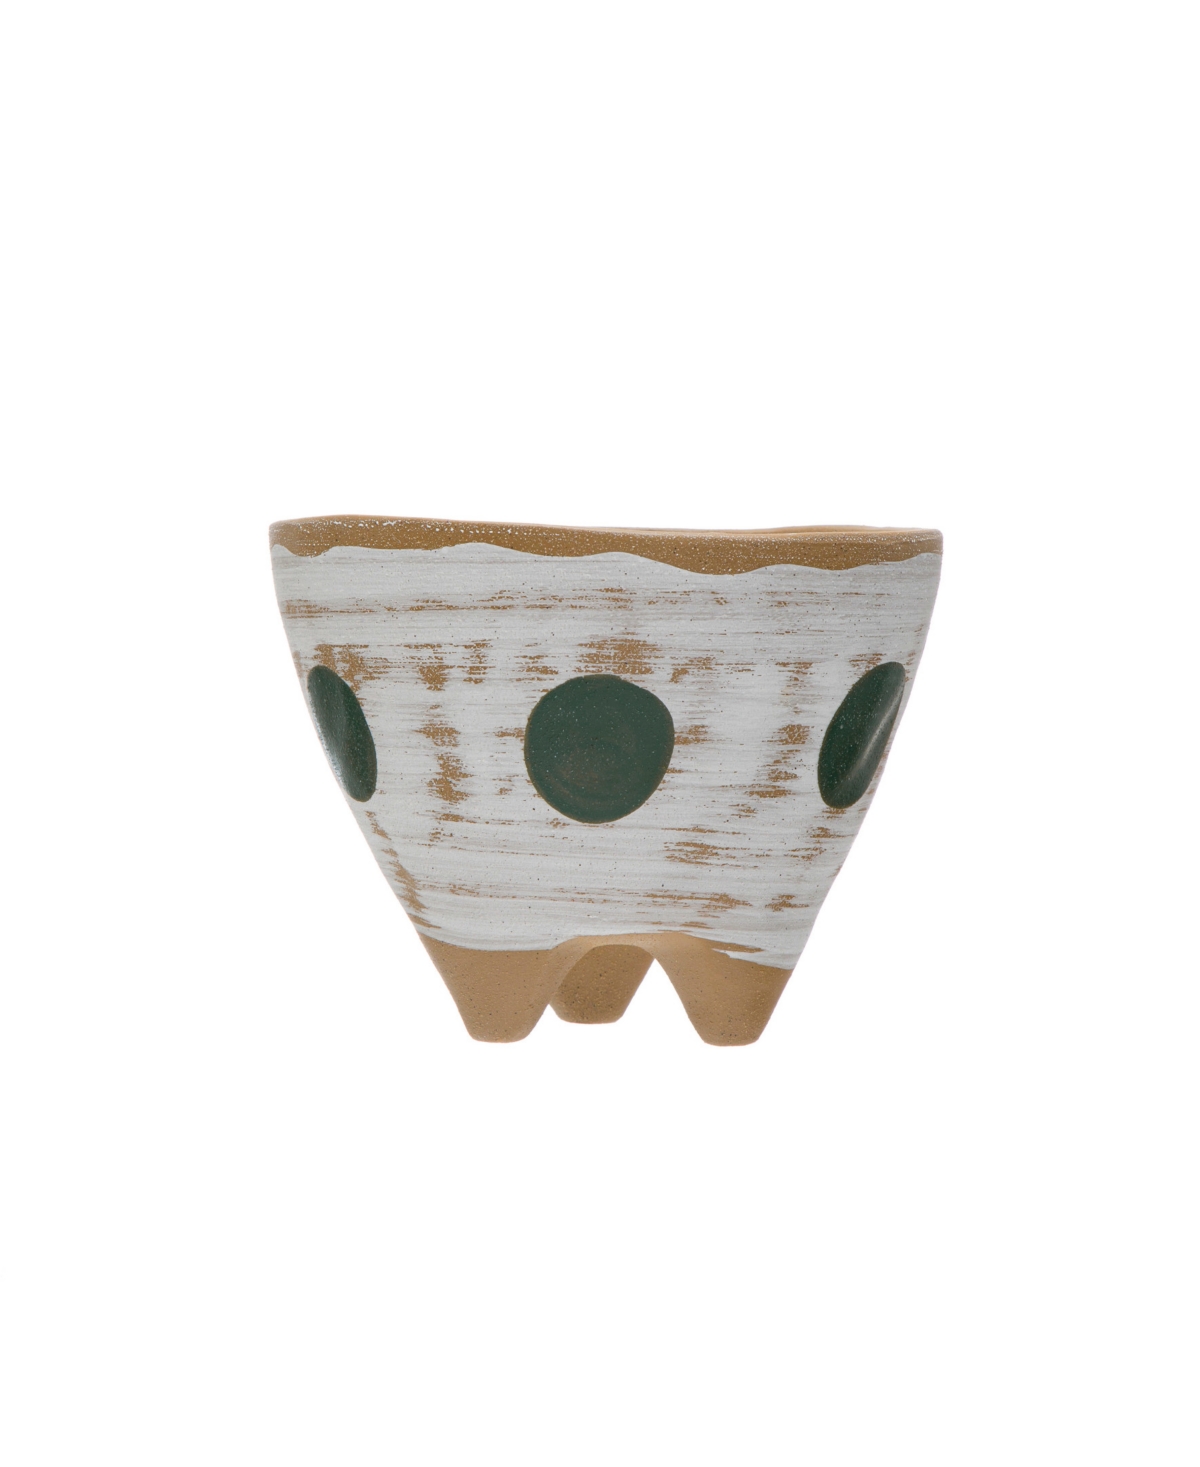 Boho Stoneware Footed Planter with Painted Geometric Design - White